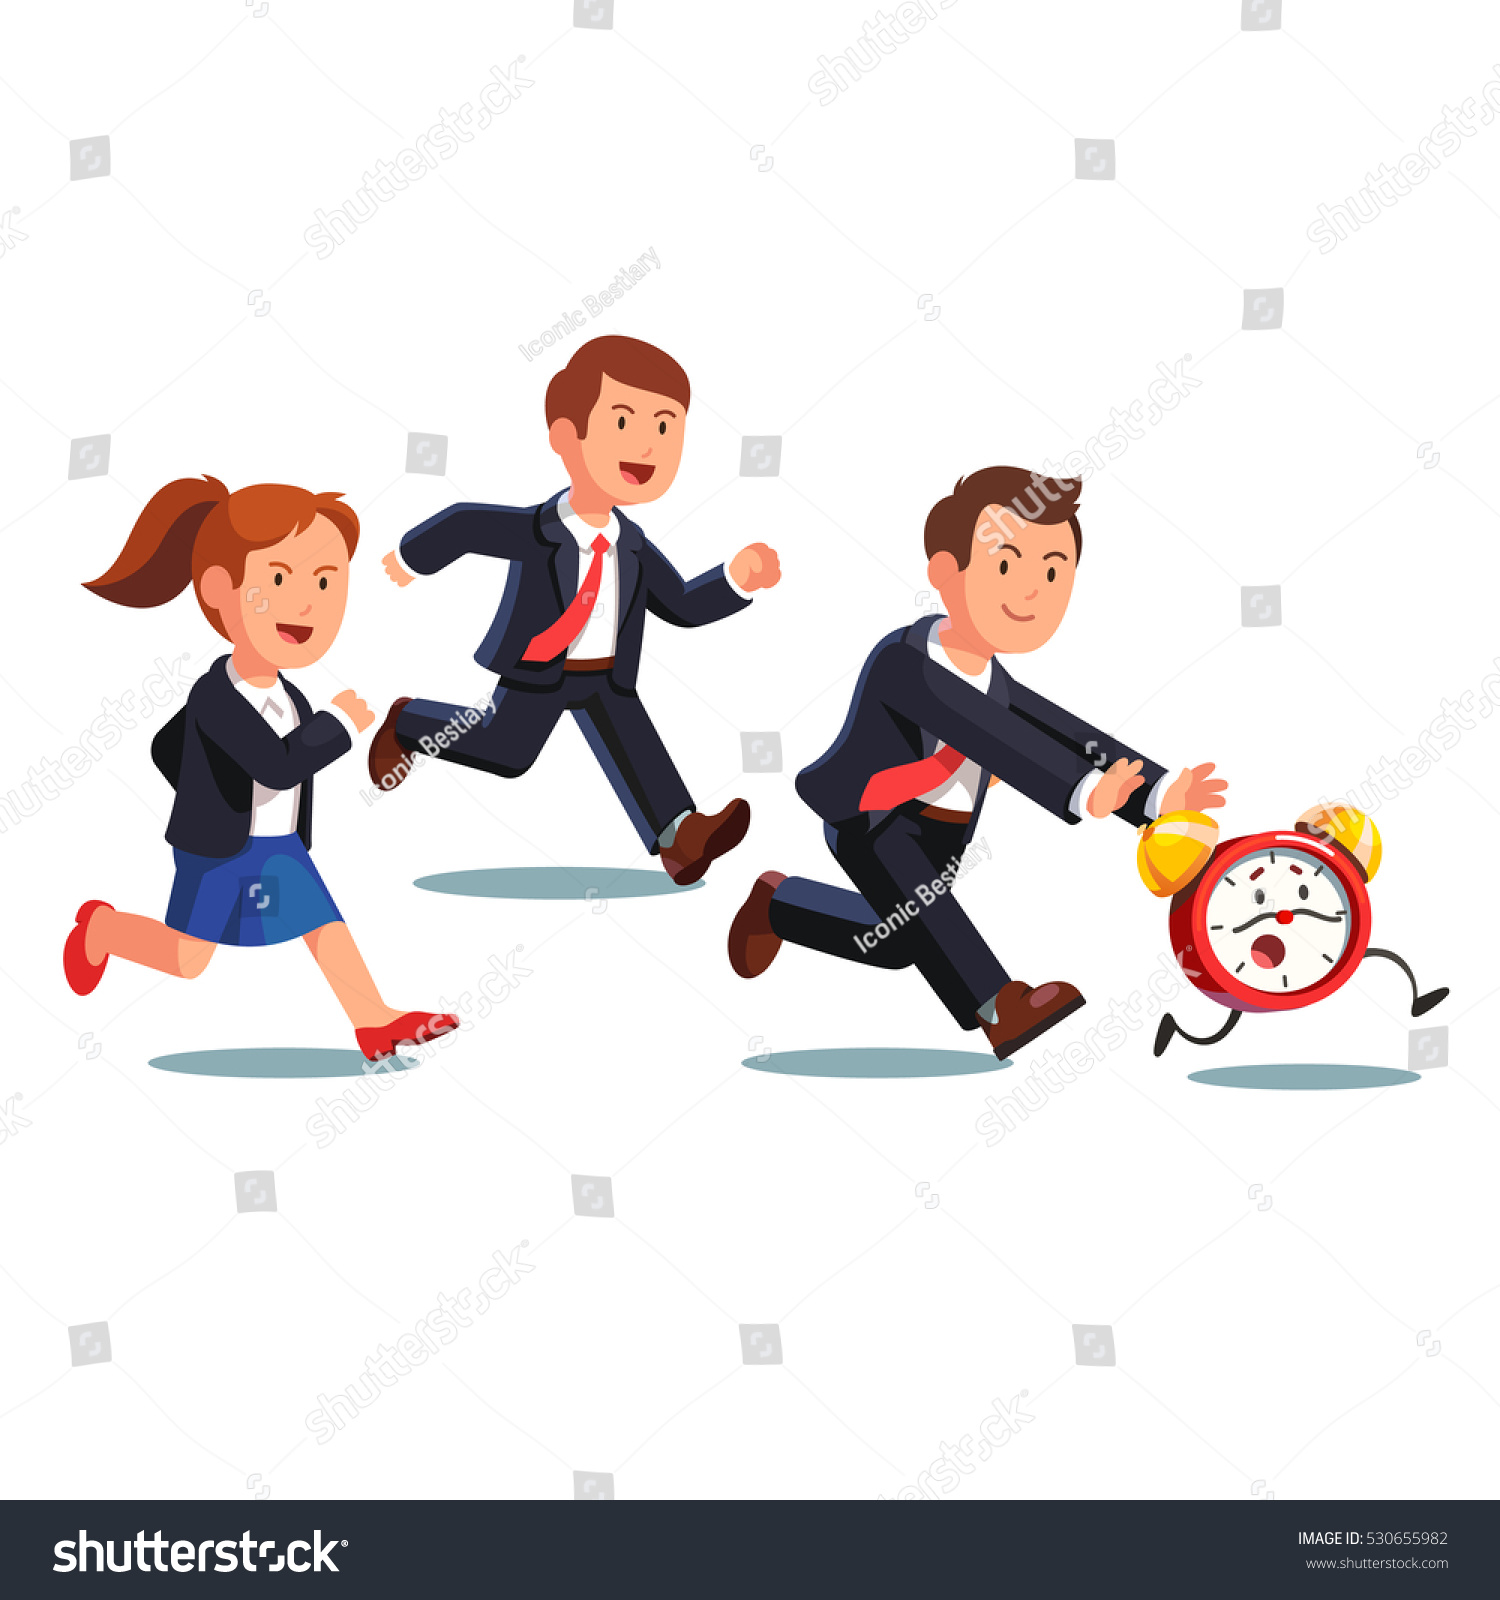 Late Business Man Woman Team Chasing Stock Photo (Photo, Vector ...